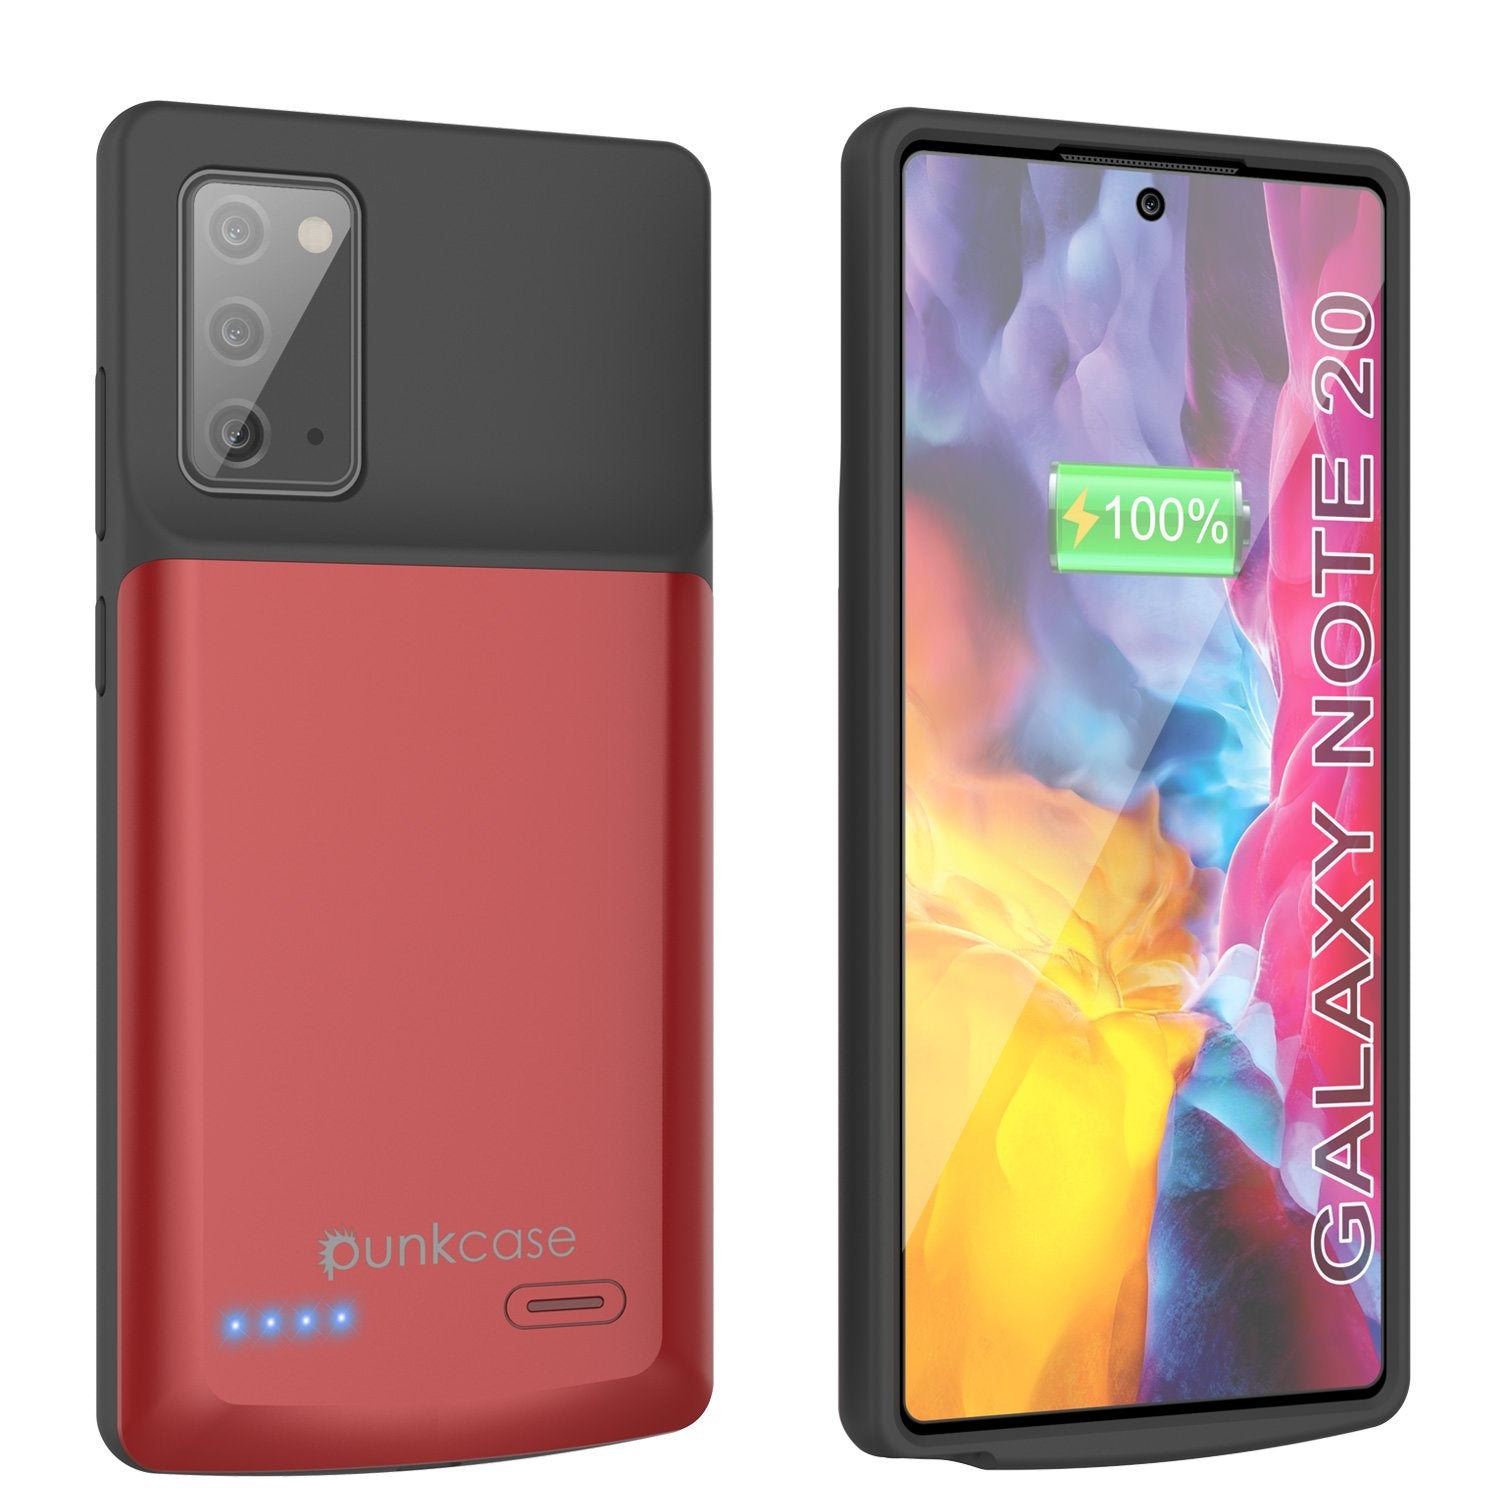 Galaxy Note 20 6000mAH Battery Charger Slim Case [Red]